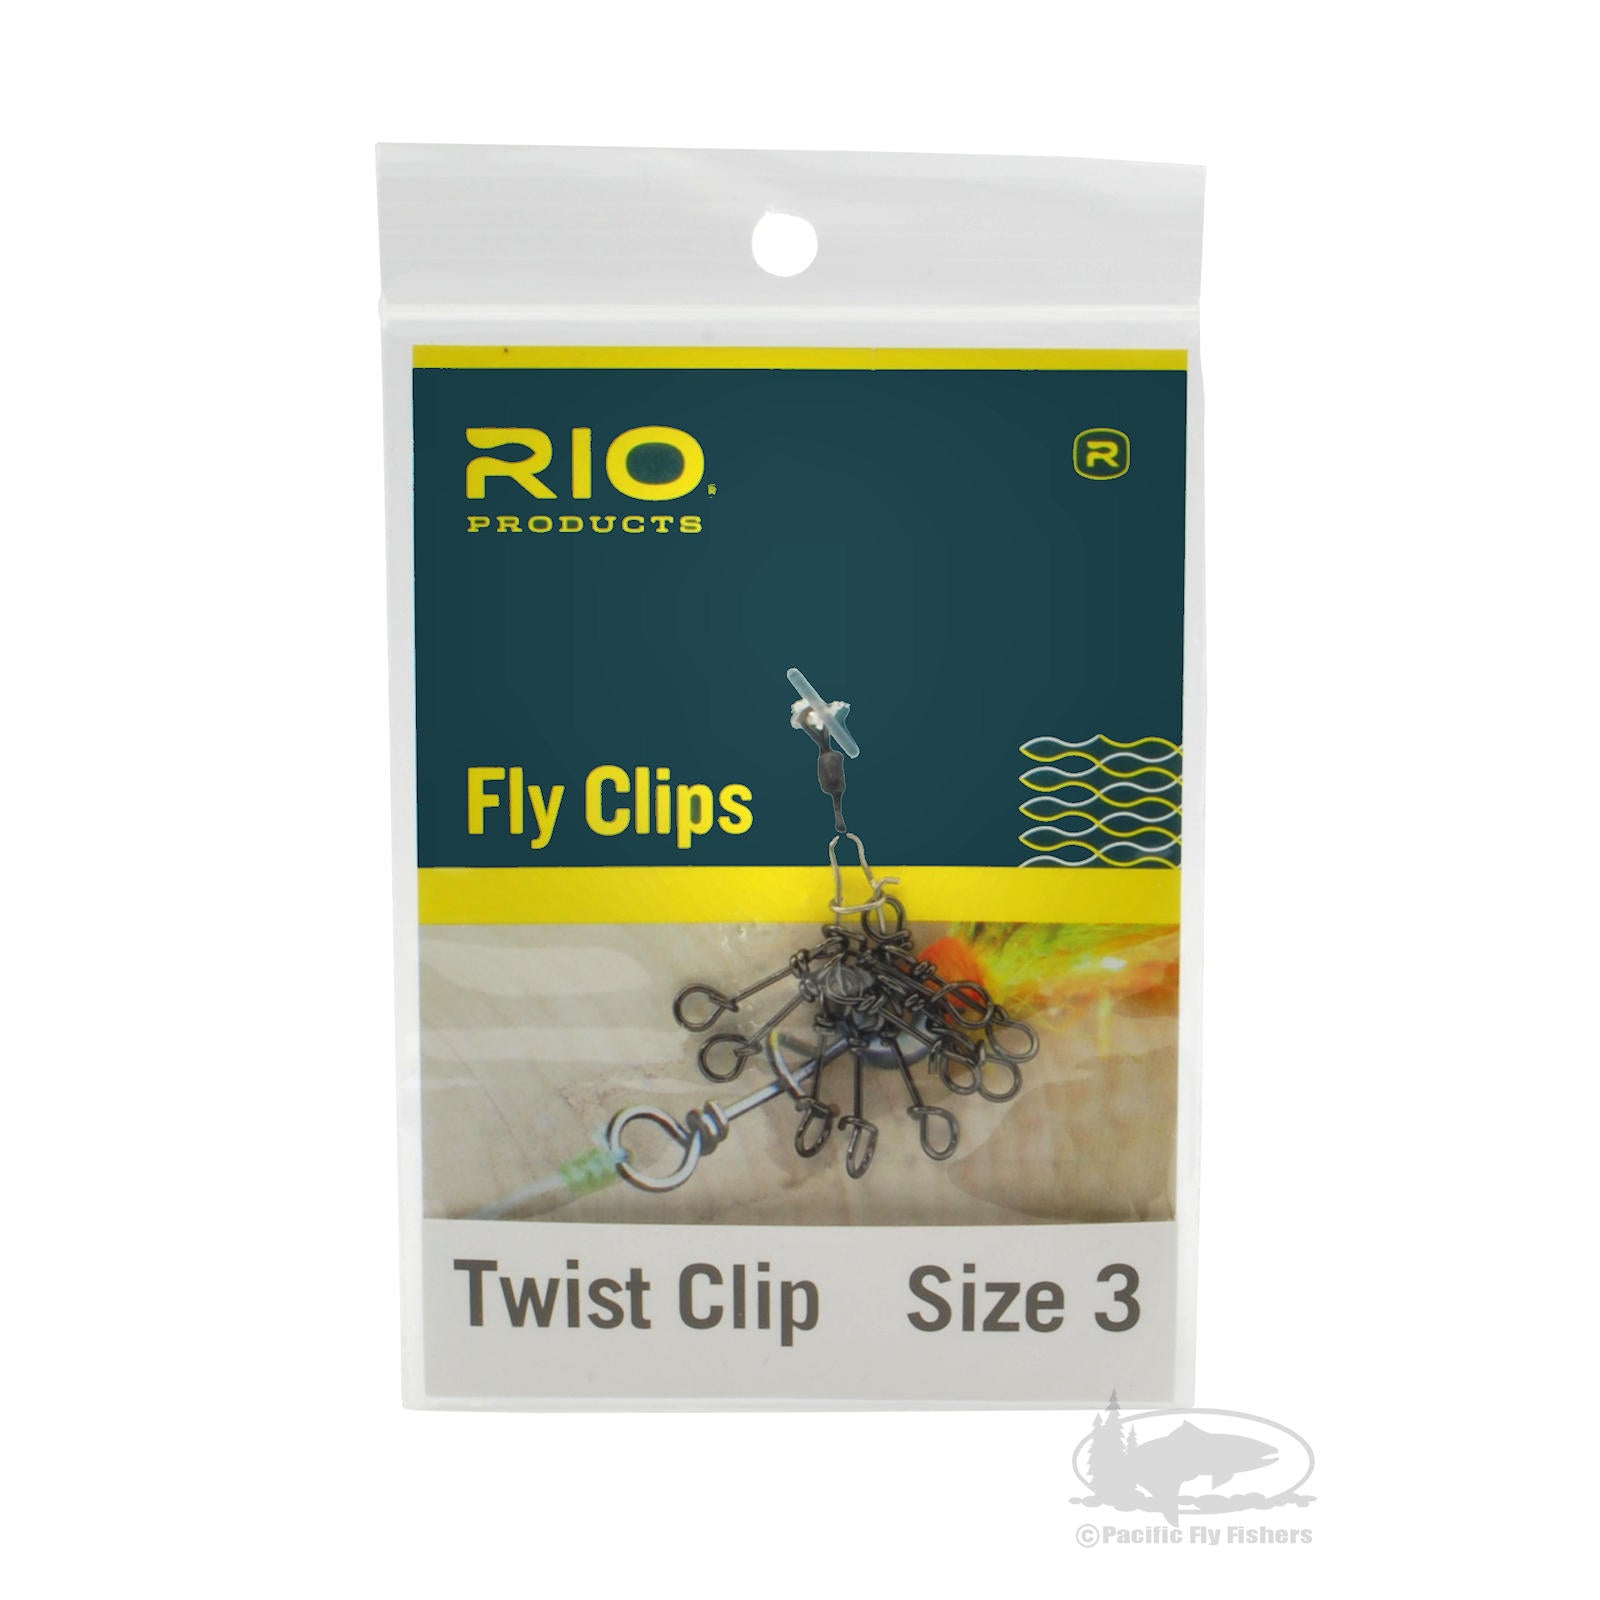 RIO Twist Clips  Pacific Fly Fishers